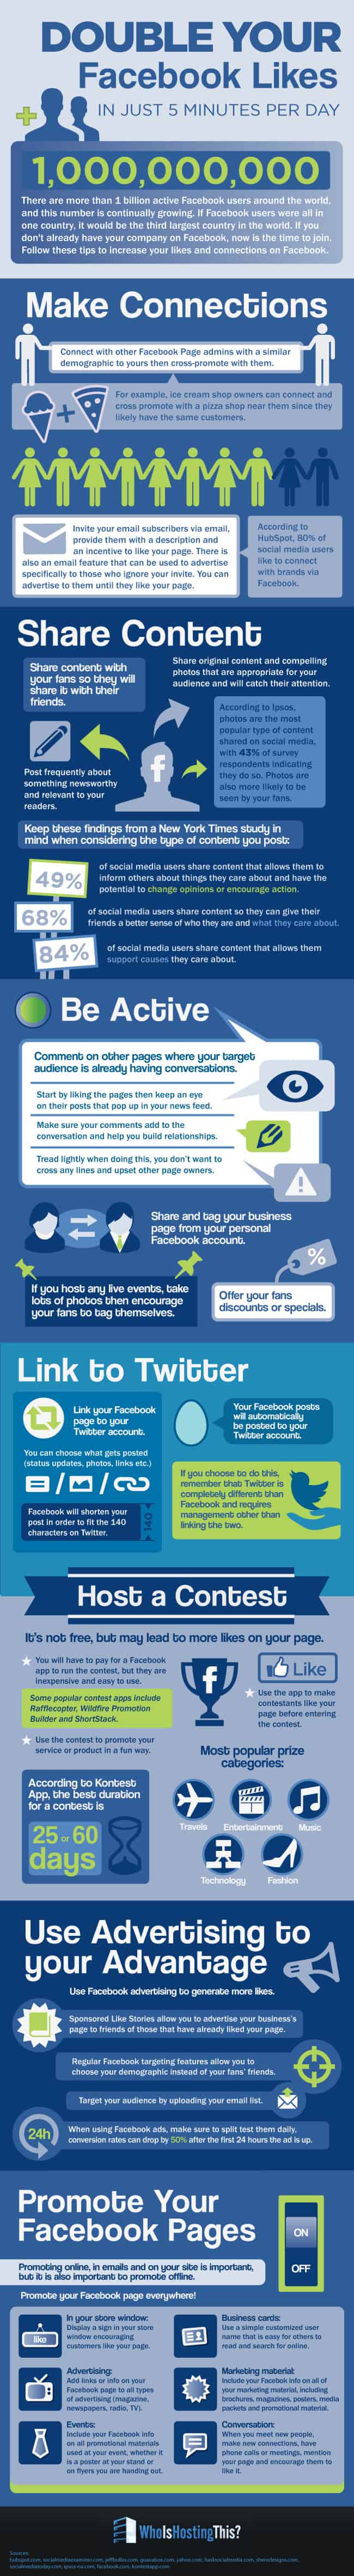 Tips To Get More Likes On Facebook